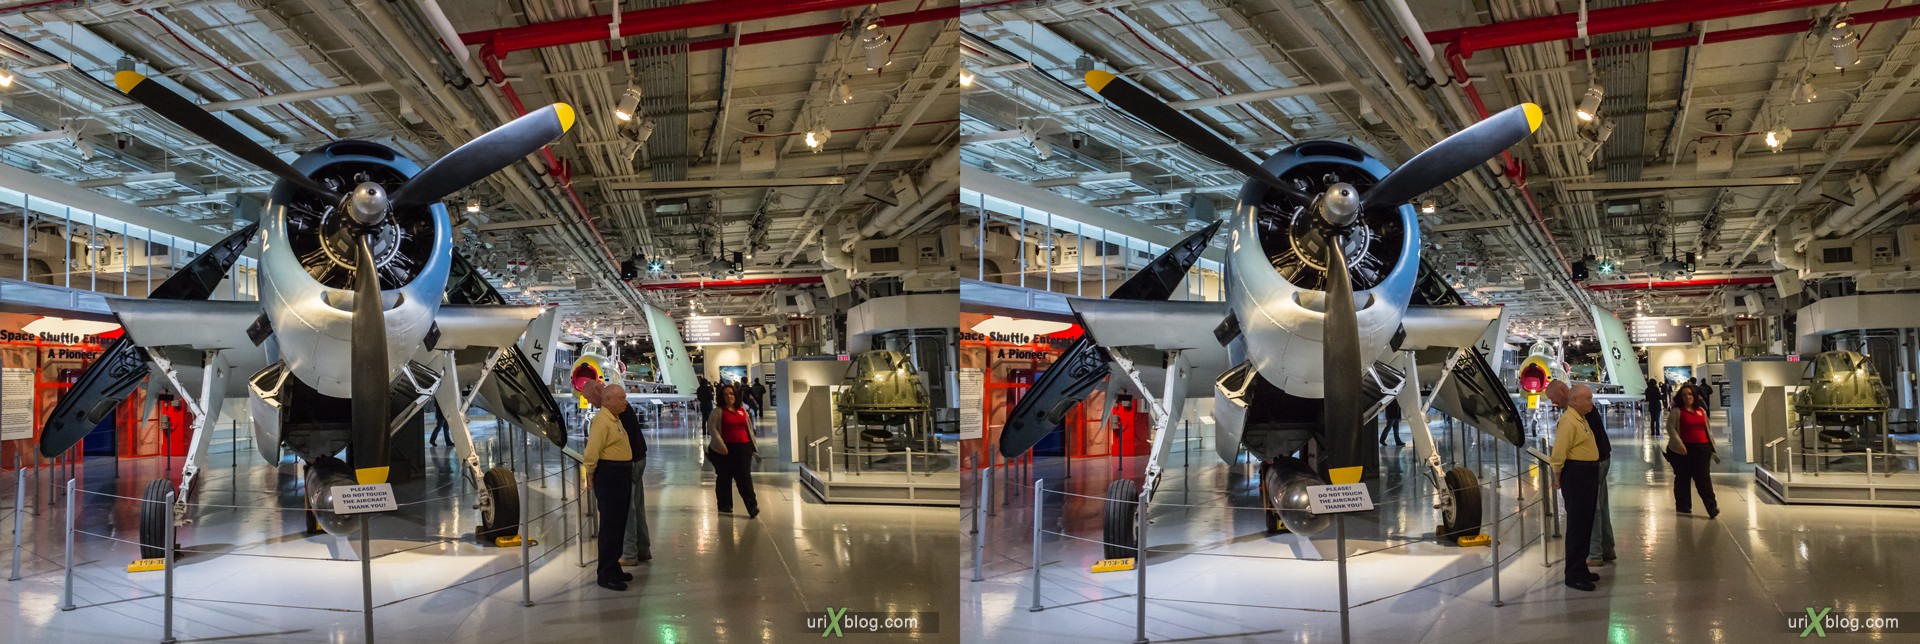 2013, USA, NYC, New York, aircraft carrier Intrepid museum, TBM-3 Avenger, sea, air, space, ship, submarine, aircraft, airplane, helicopter, military, 3D, stereo pair, cross-eyed, crossview, cross view stereo pair, stereoscopic